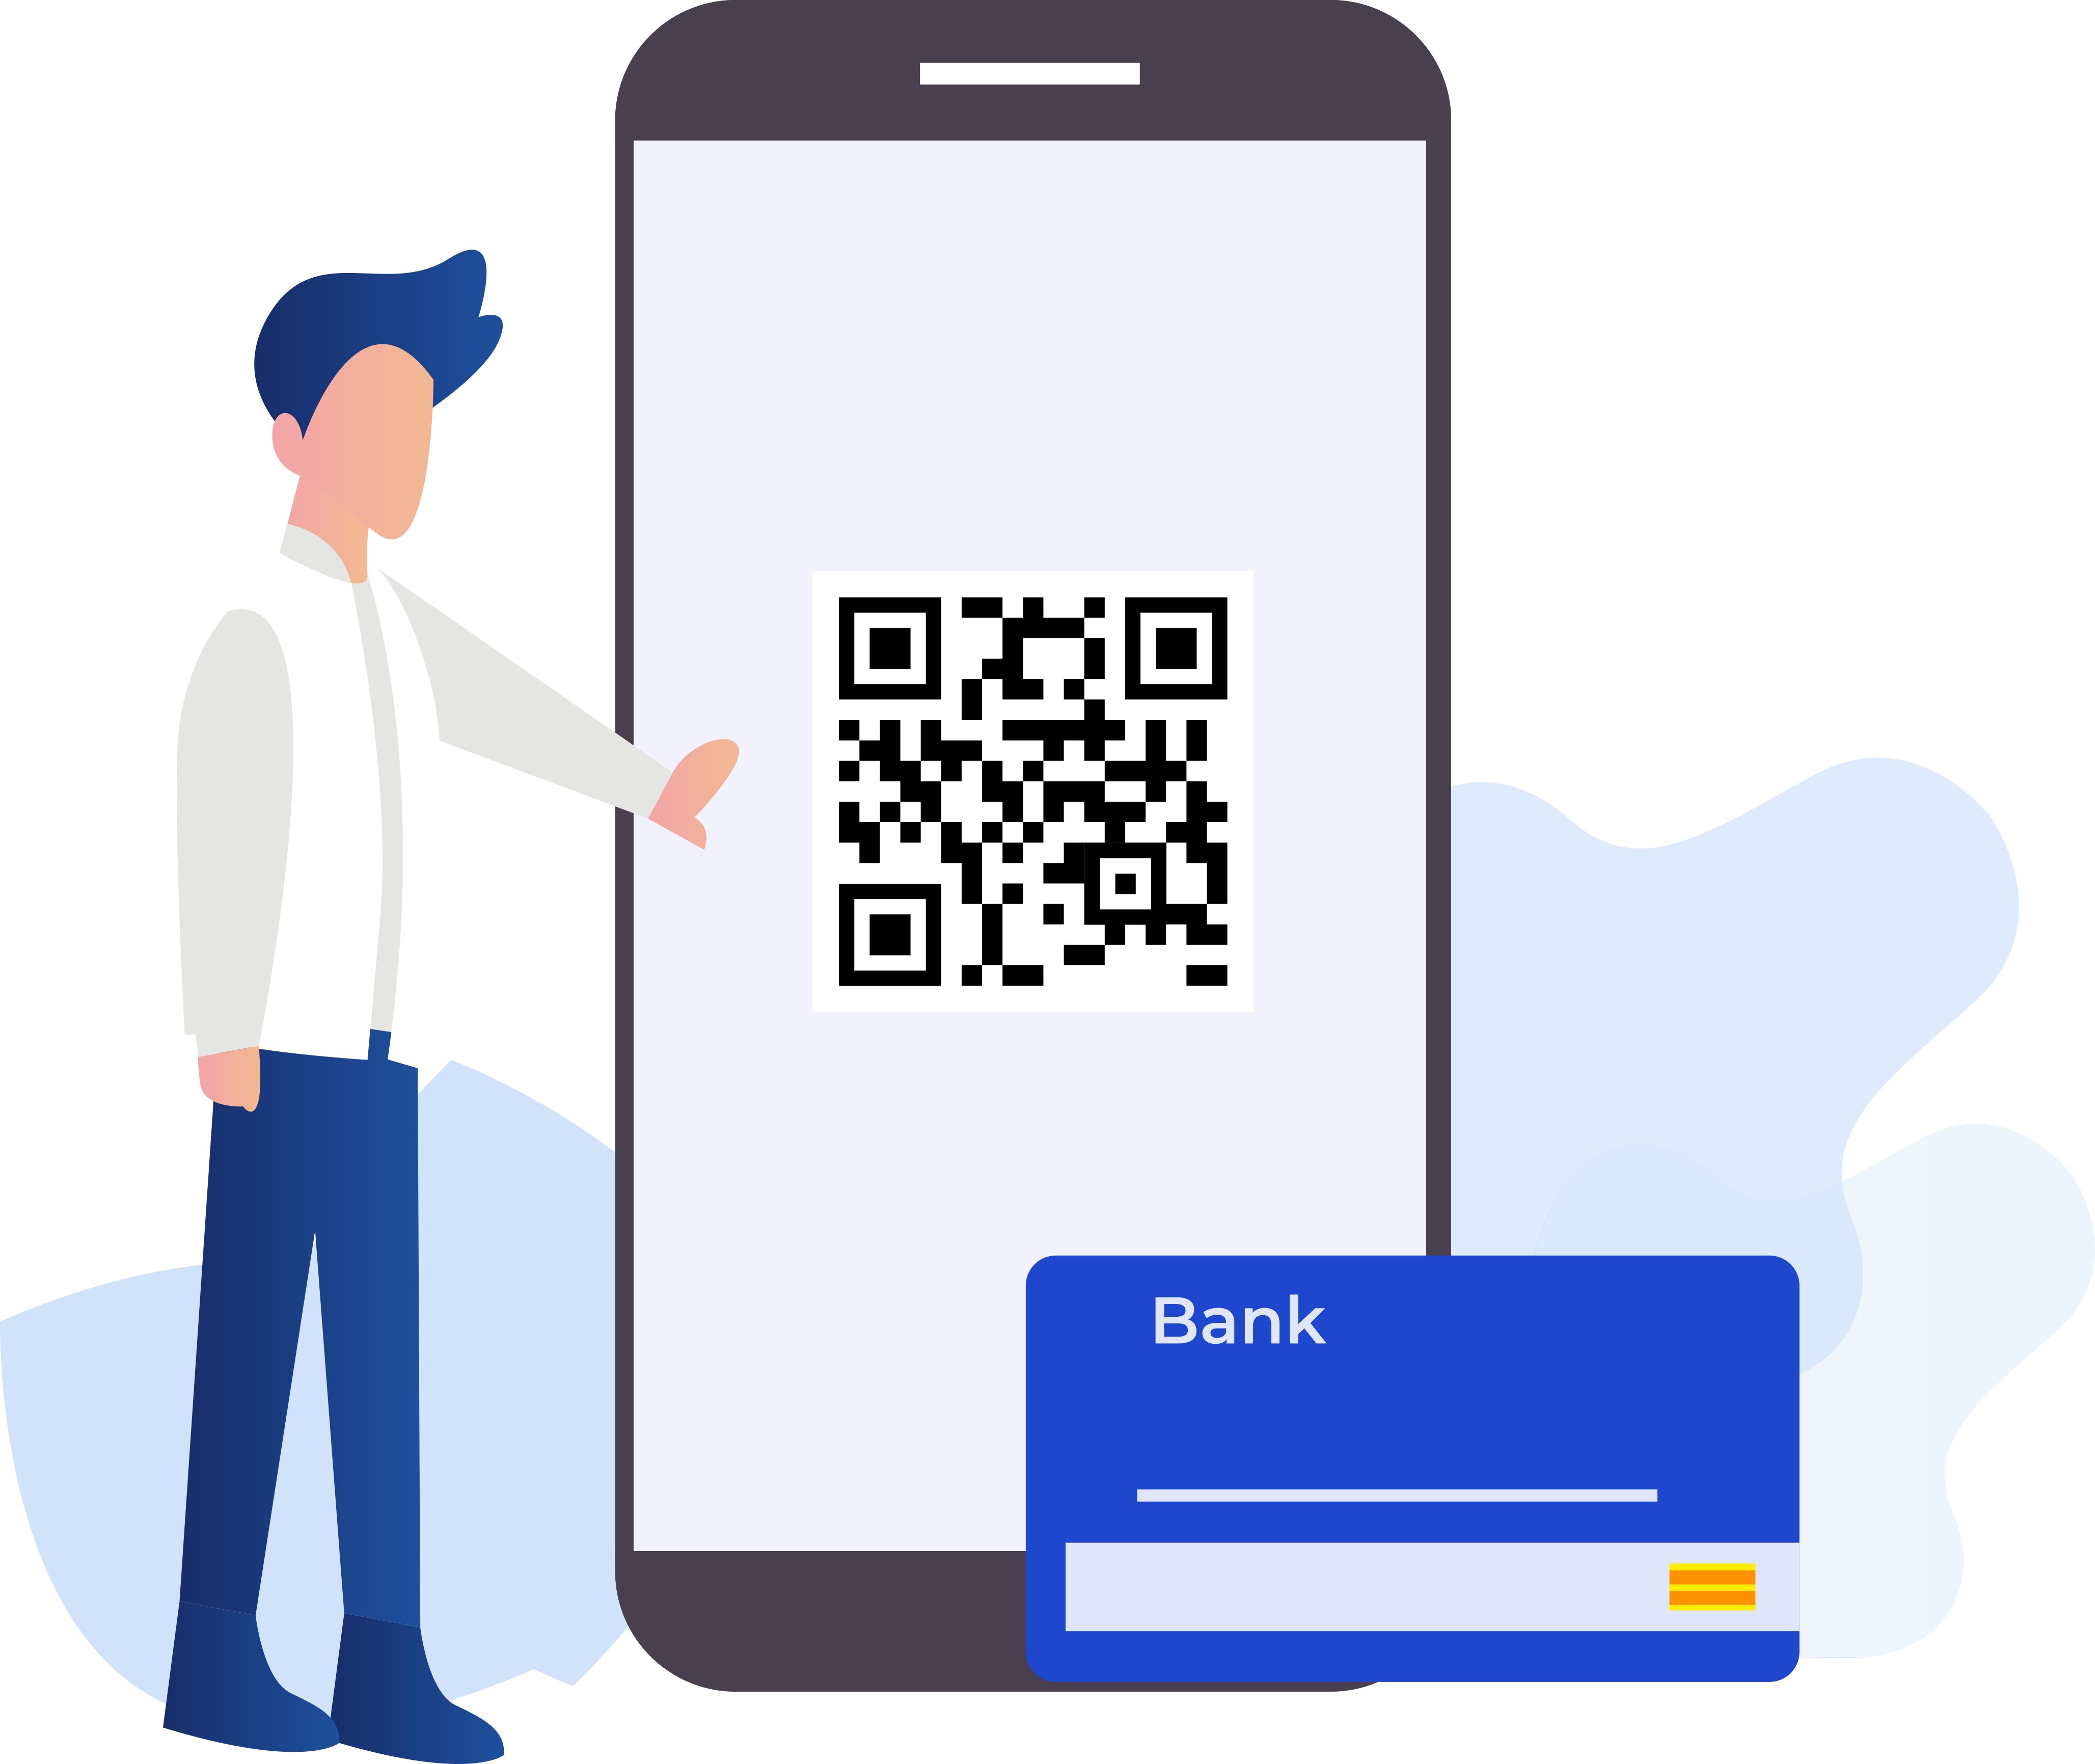 Payment Solution